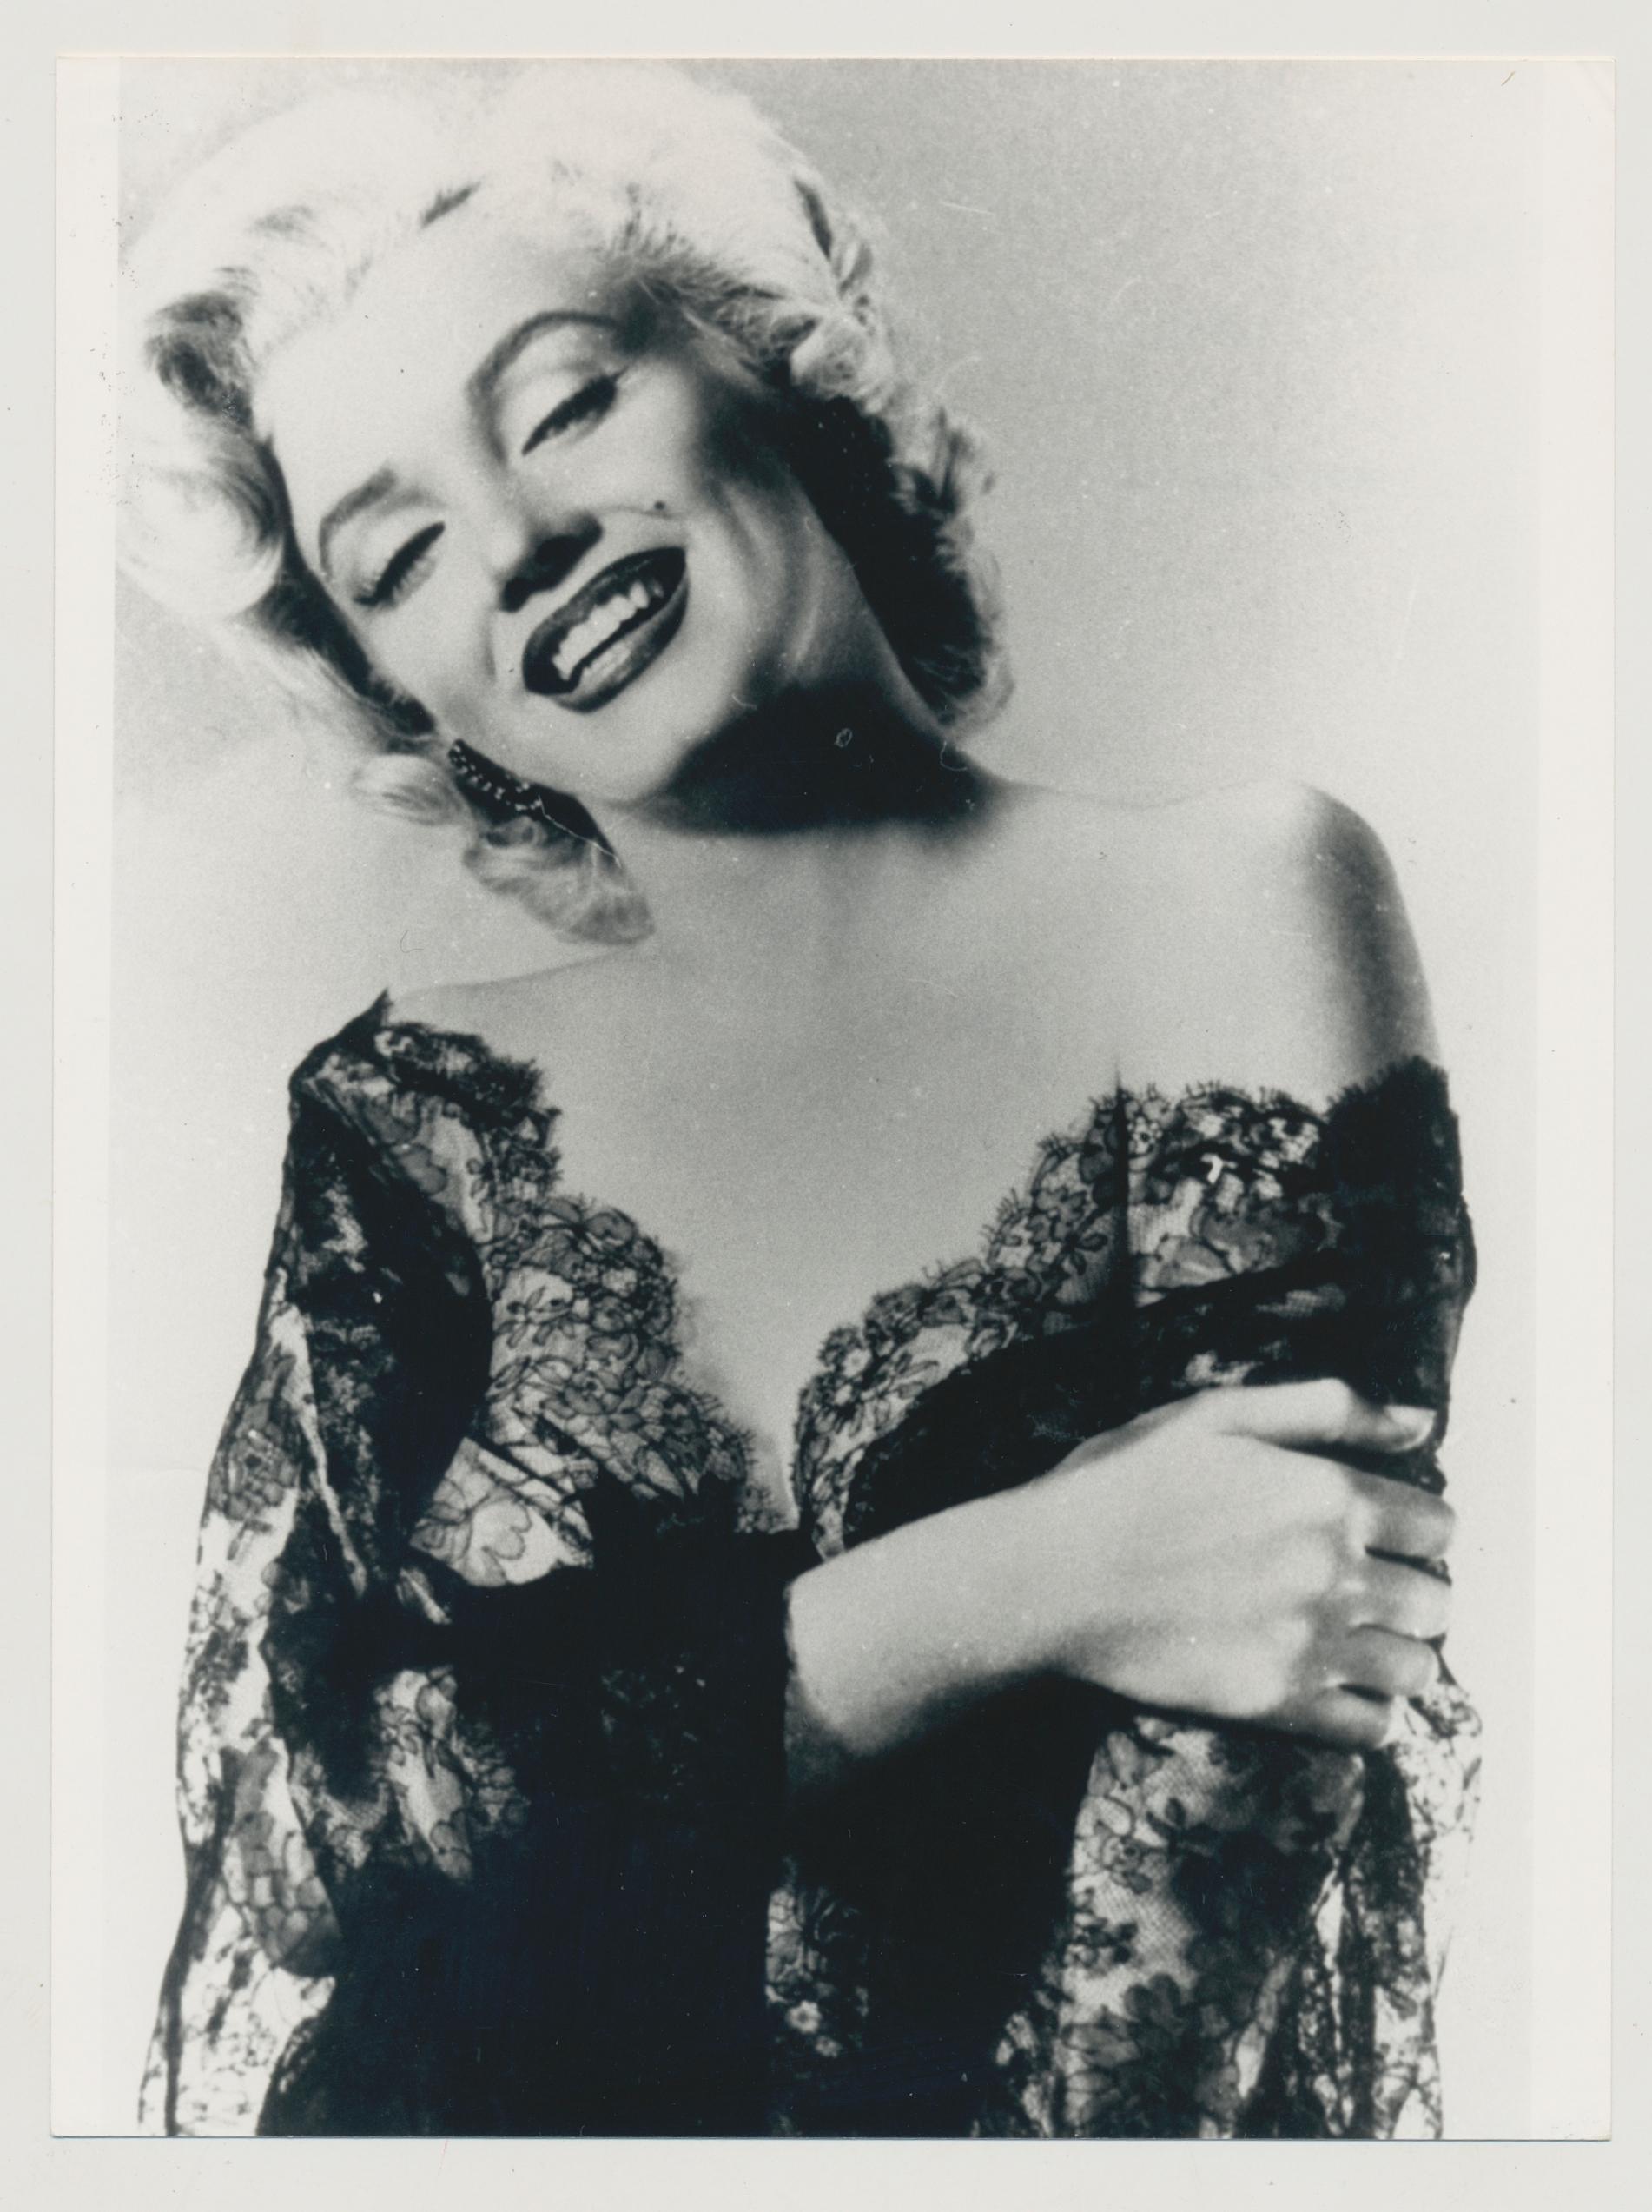 Unknown Black and White Photograph - Marilyn Monroe Studio Shoot, 1950s, 15 x 20, 2 cm